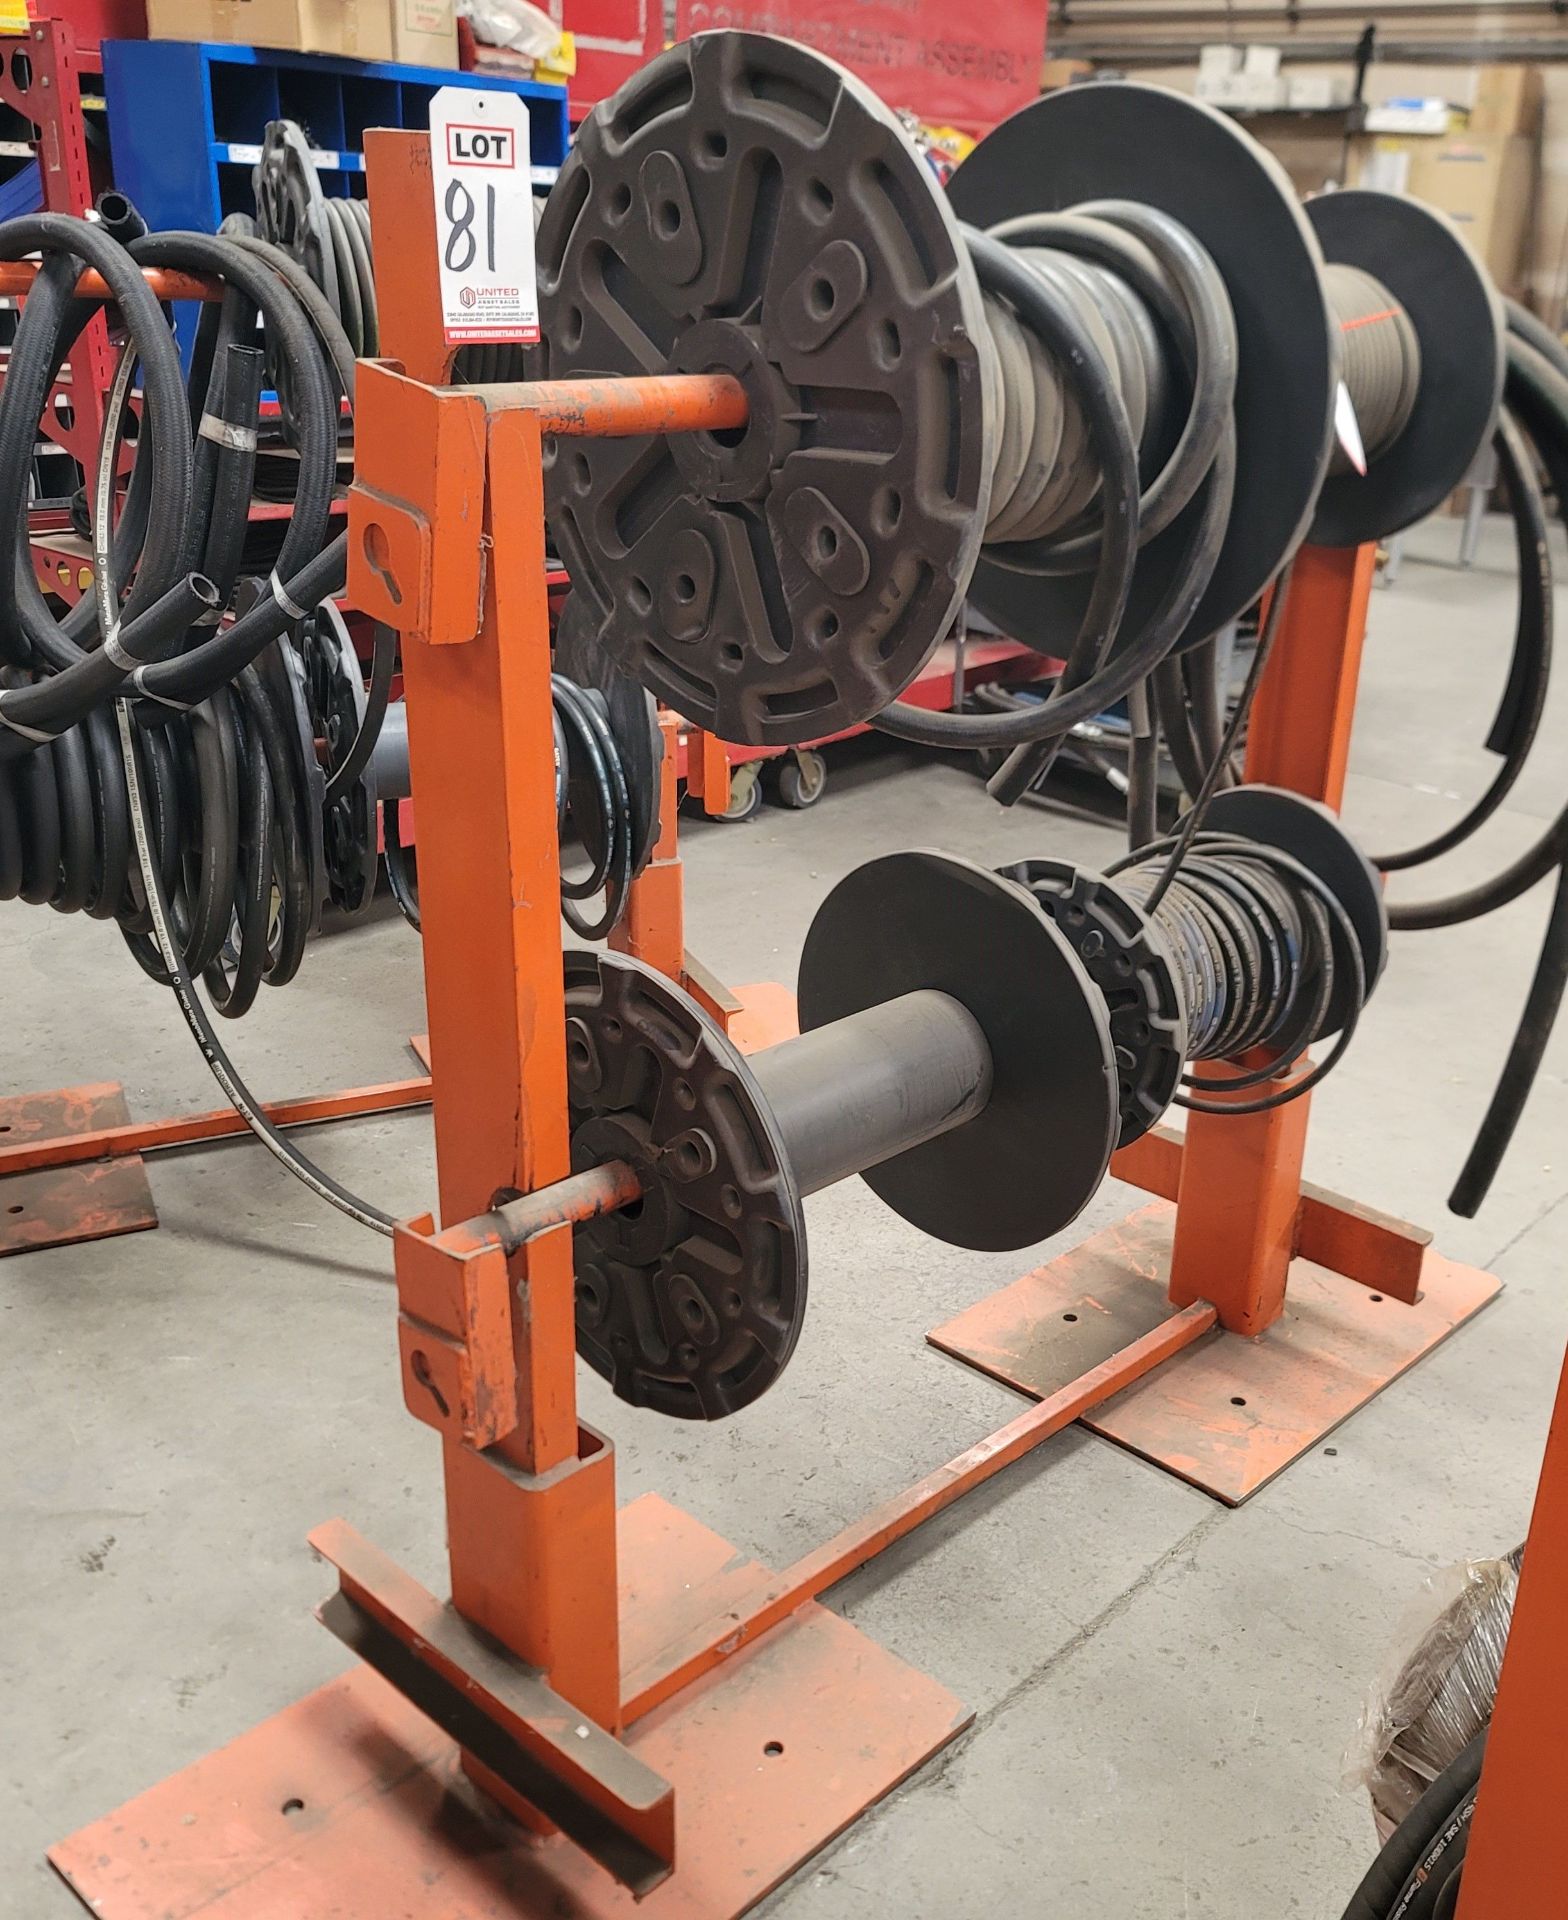 SPOOL DISPENSING RACK, 4' BETWEEN UPRIGHTS, CONTENTS NOT INCLUDED